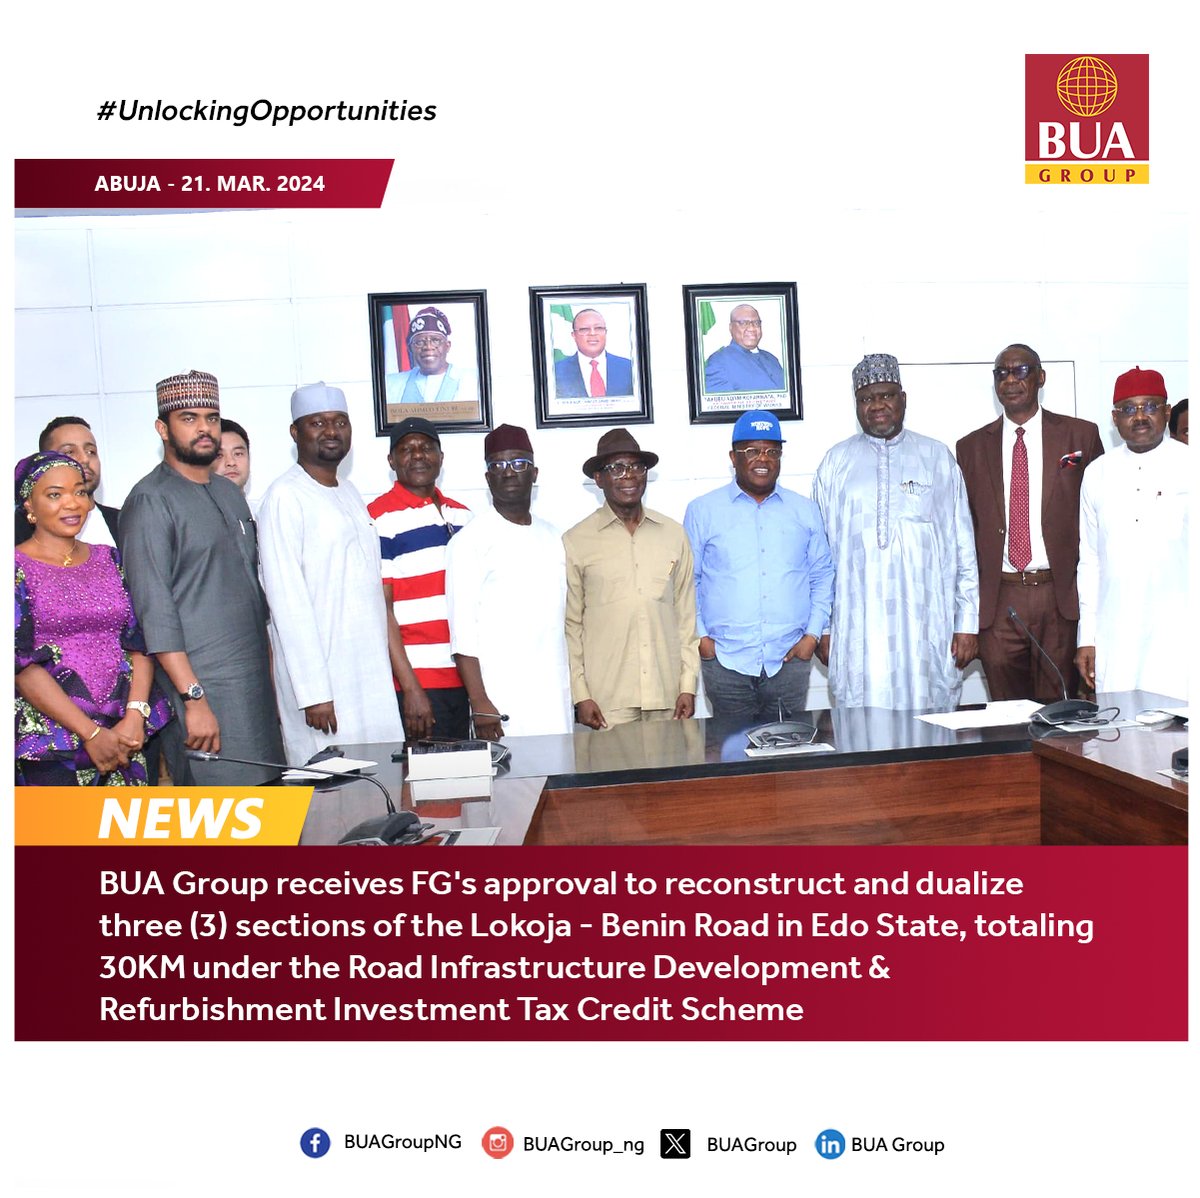 In case you missed it. BUA Group receives Federal Government's approval to reconstruct and dualize three (3) sections of the Lokoja - Benin Road in Edo State, totaling 30KM under the Road Infrastructure Development & Refurbishment Investment Tax Credit Scheme. #BUAGroup